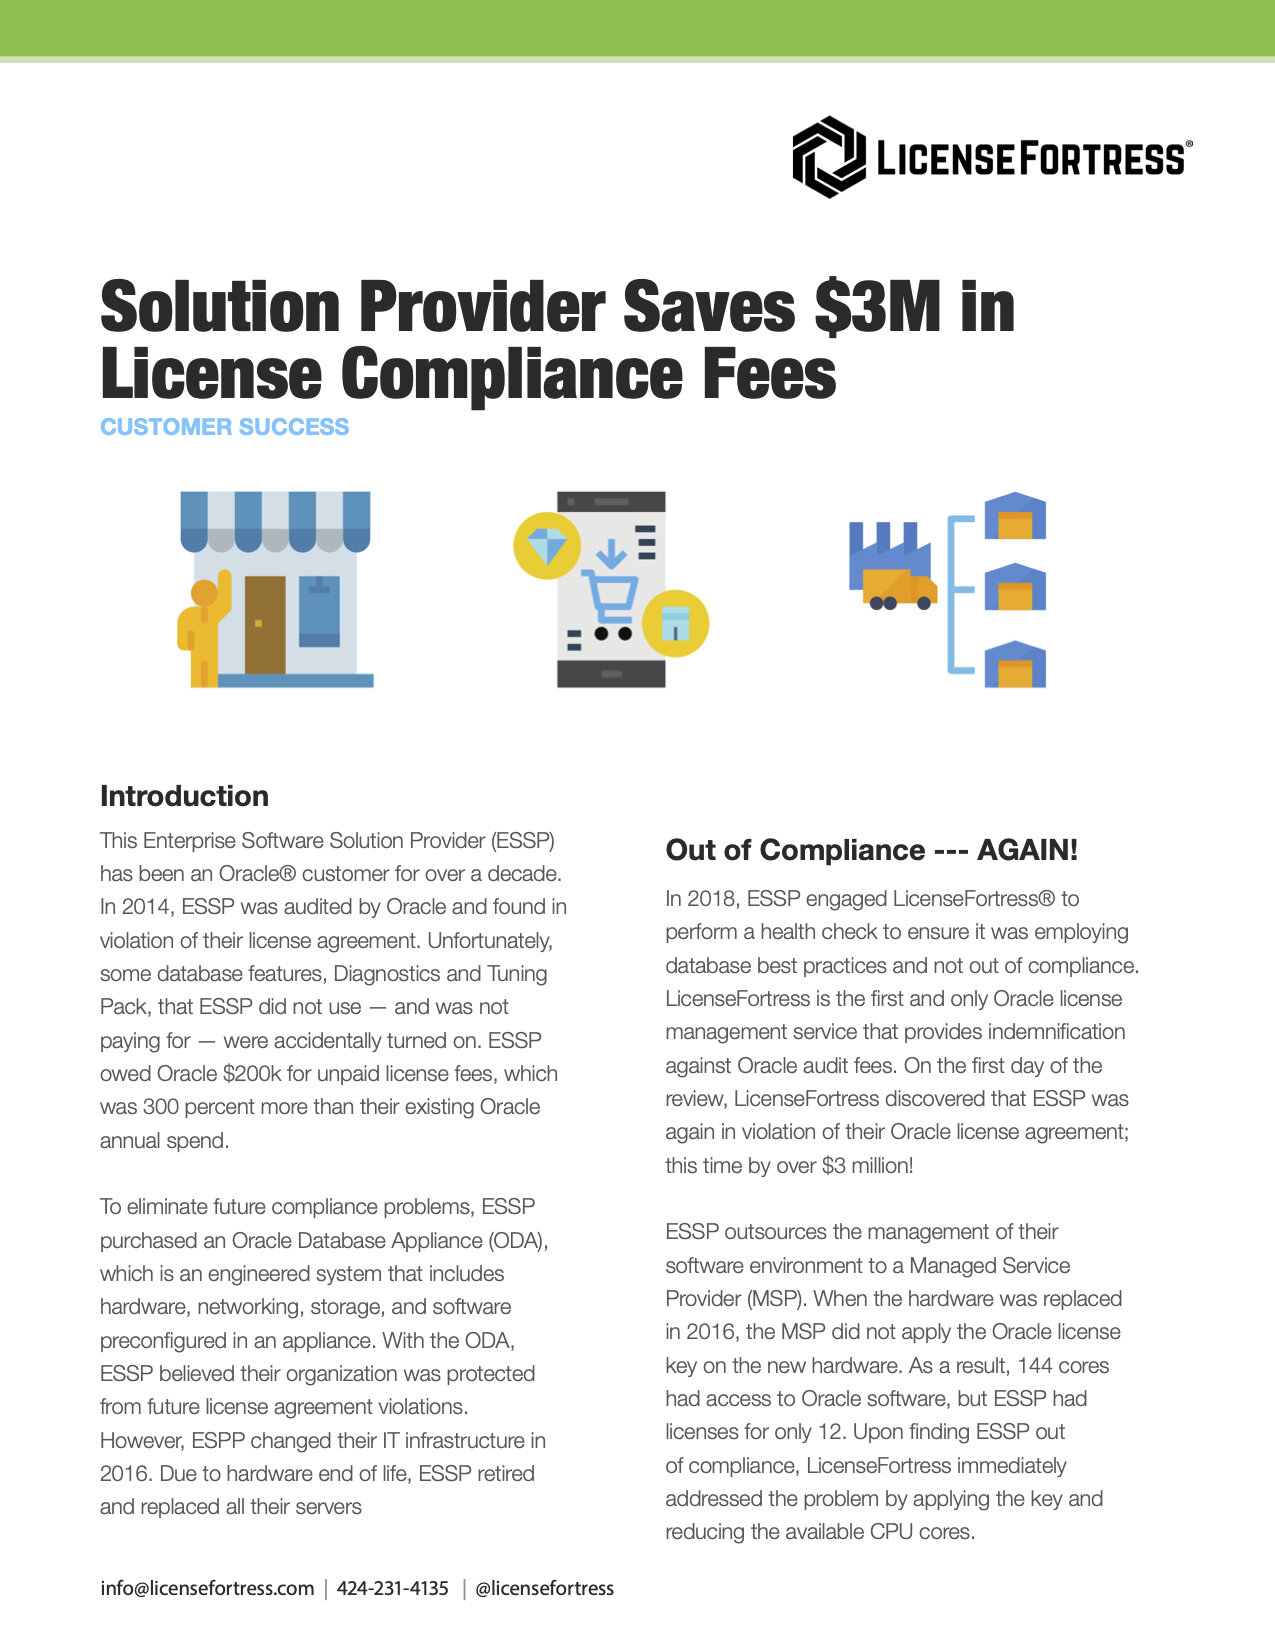 Solution Provider Saves $3M in License Compliance Fees 